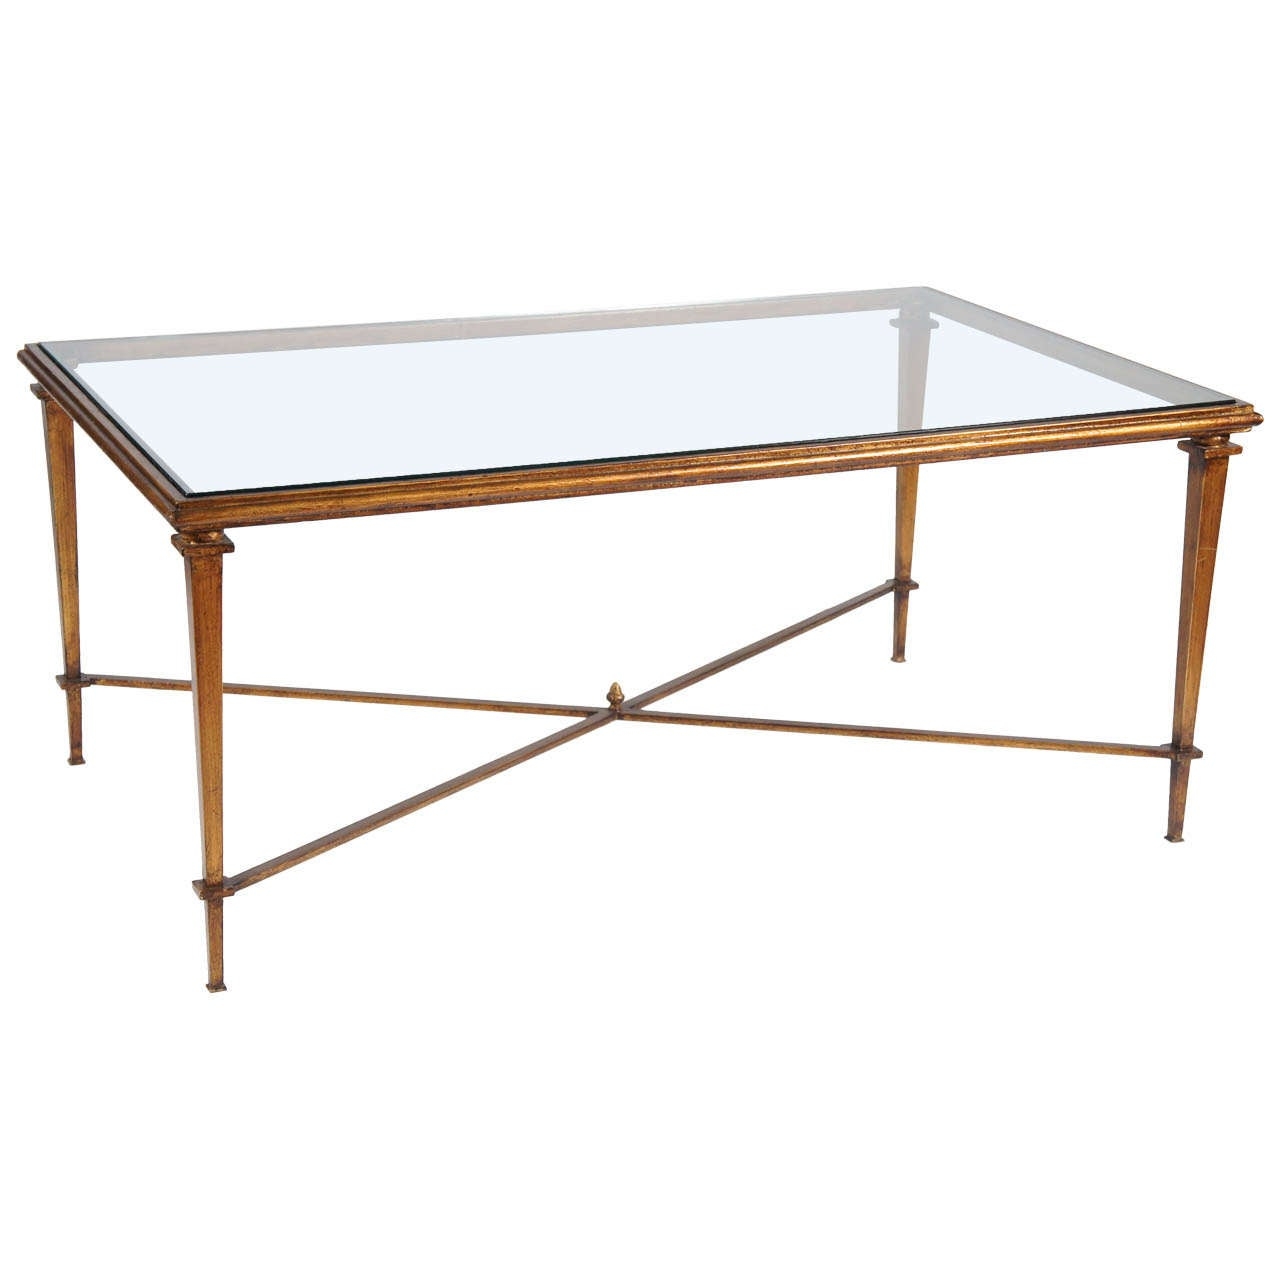 Neoclassical style bronze metal coffee table glass top